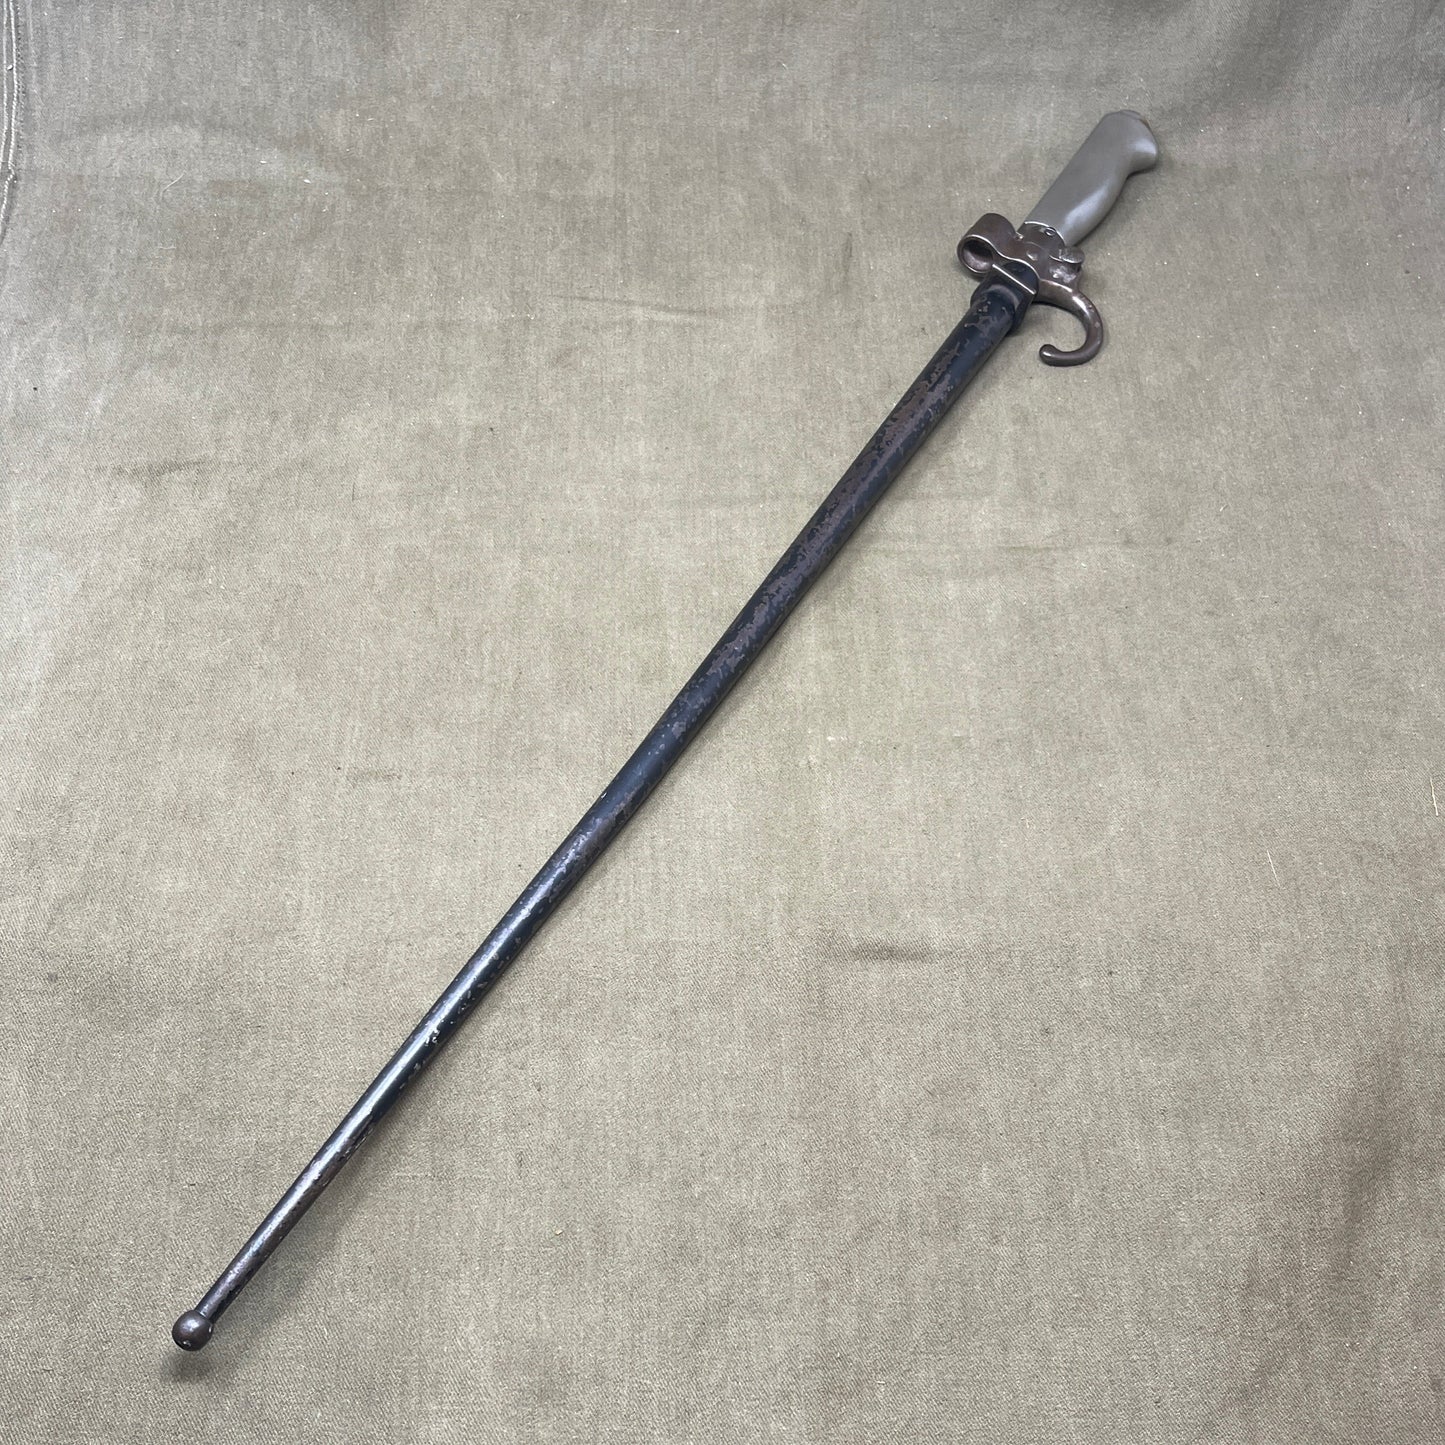 French Model 1886/15 bayonet with scabbard